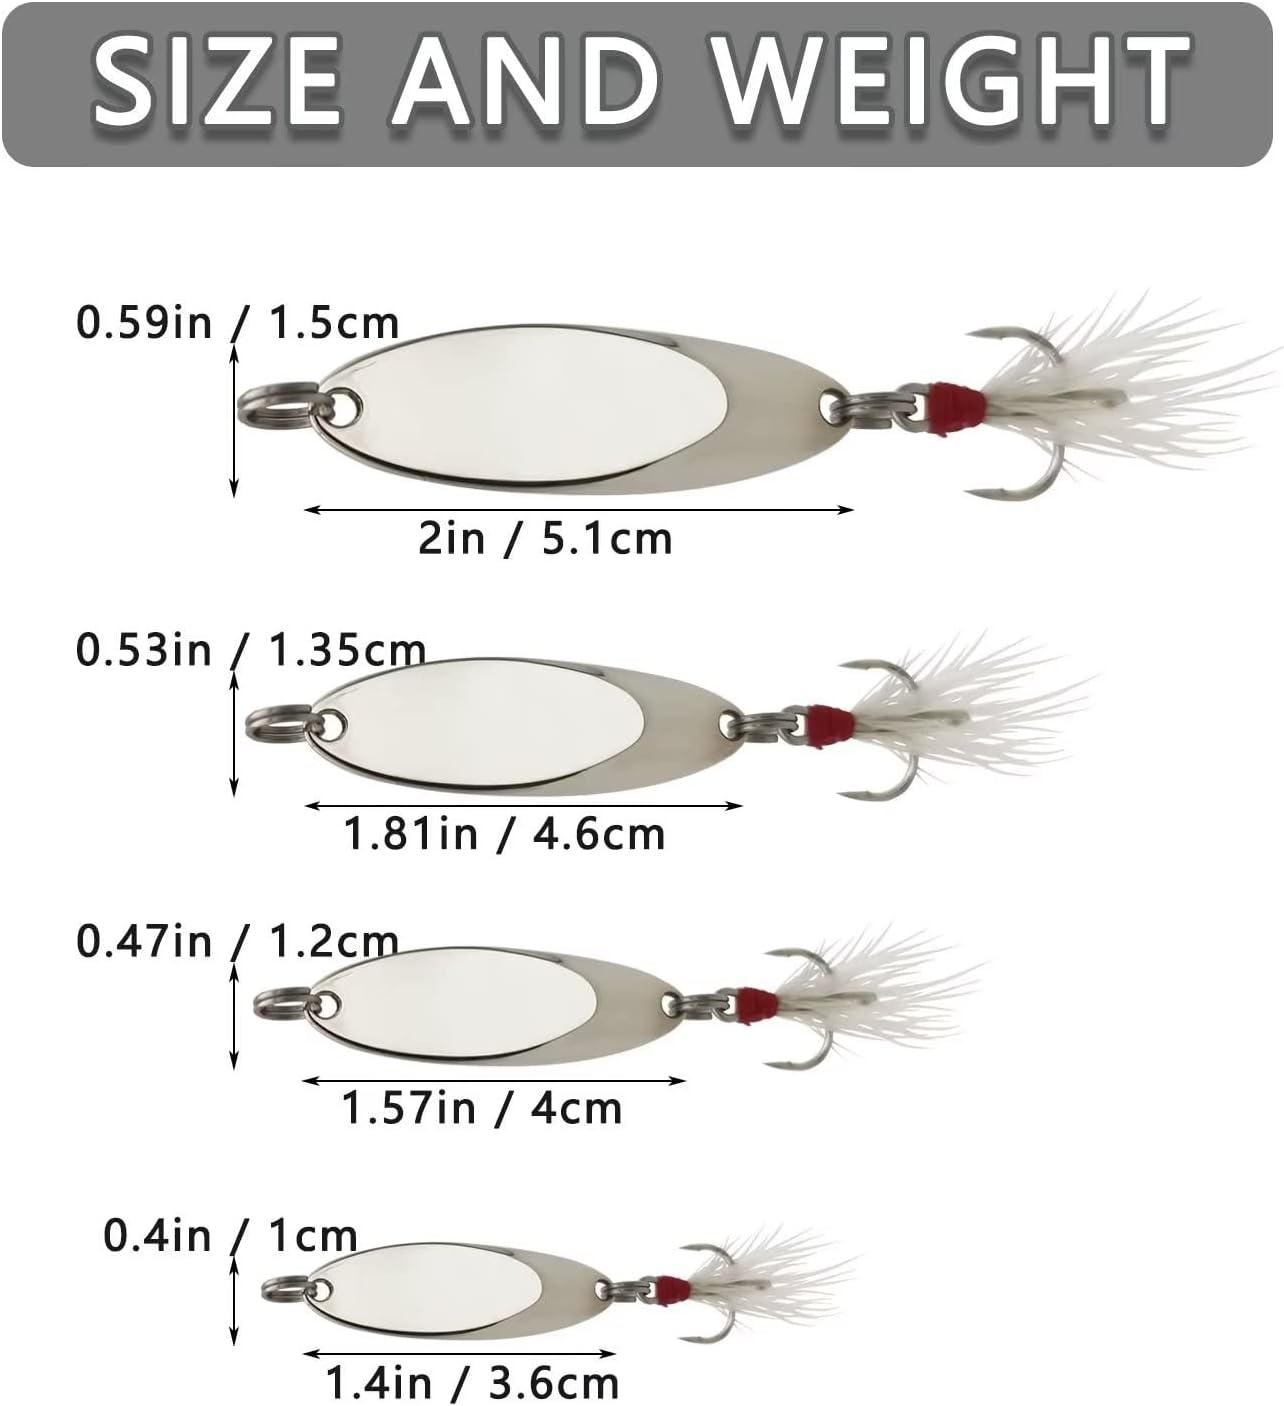 CWSDXM Fishing Spoons Fishing Lures Casting Spoon Metal Jig Lure Trout Lures  for Freshwater/Saltwater, Reflective Spoons Bait with Treble Hooks Fishing  Tackle 0.17 oz - 0.63 oz 5 Pcs Sliver (5pcs) 1/4oz